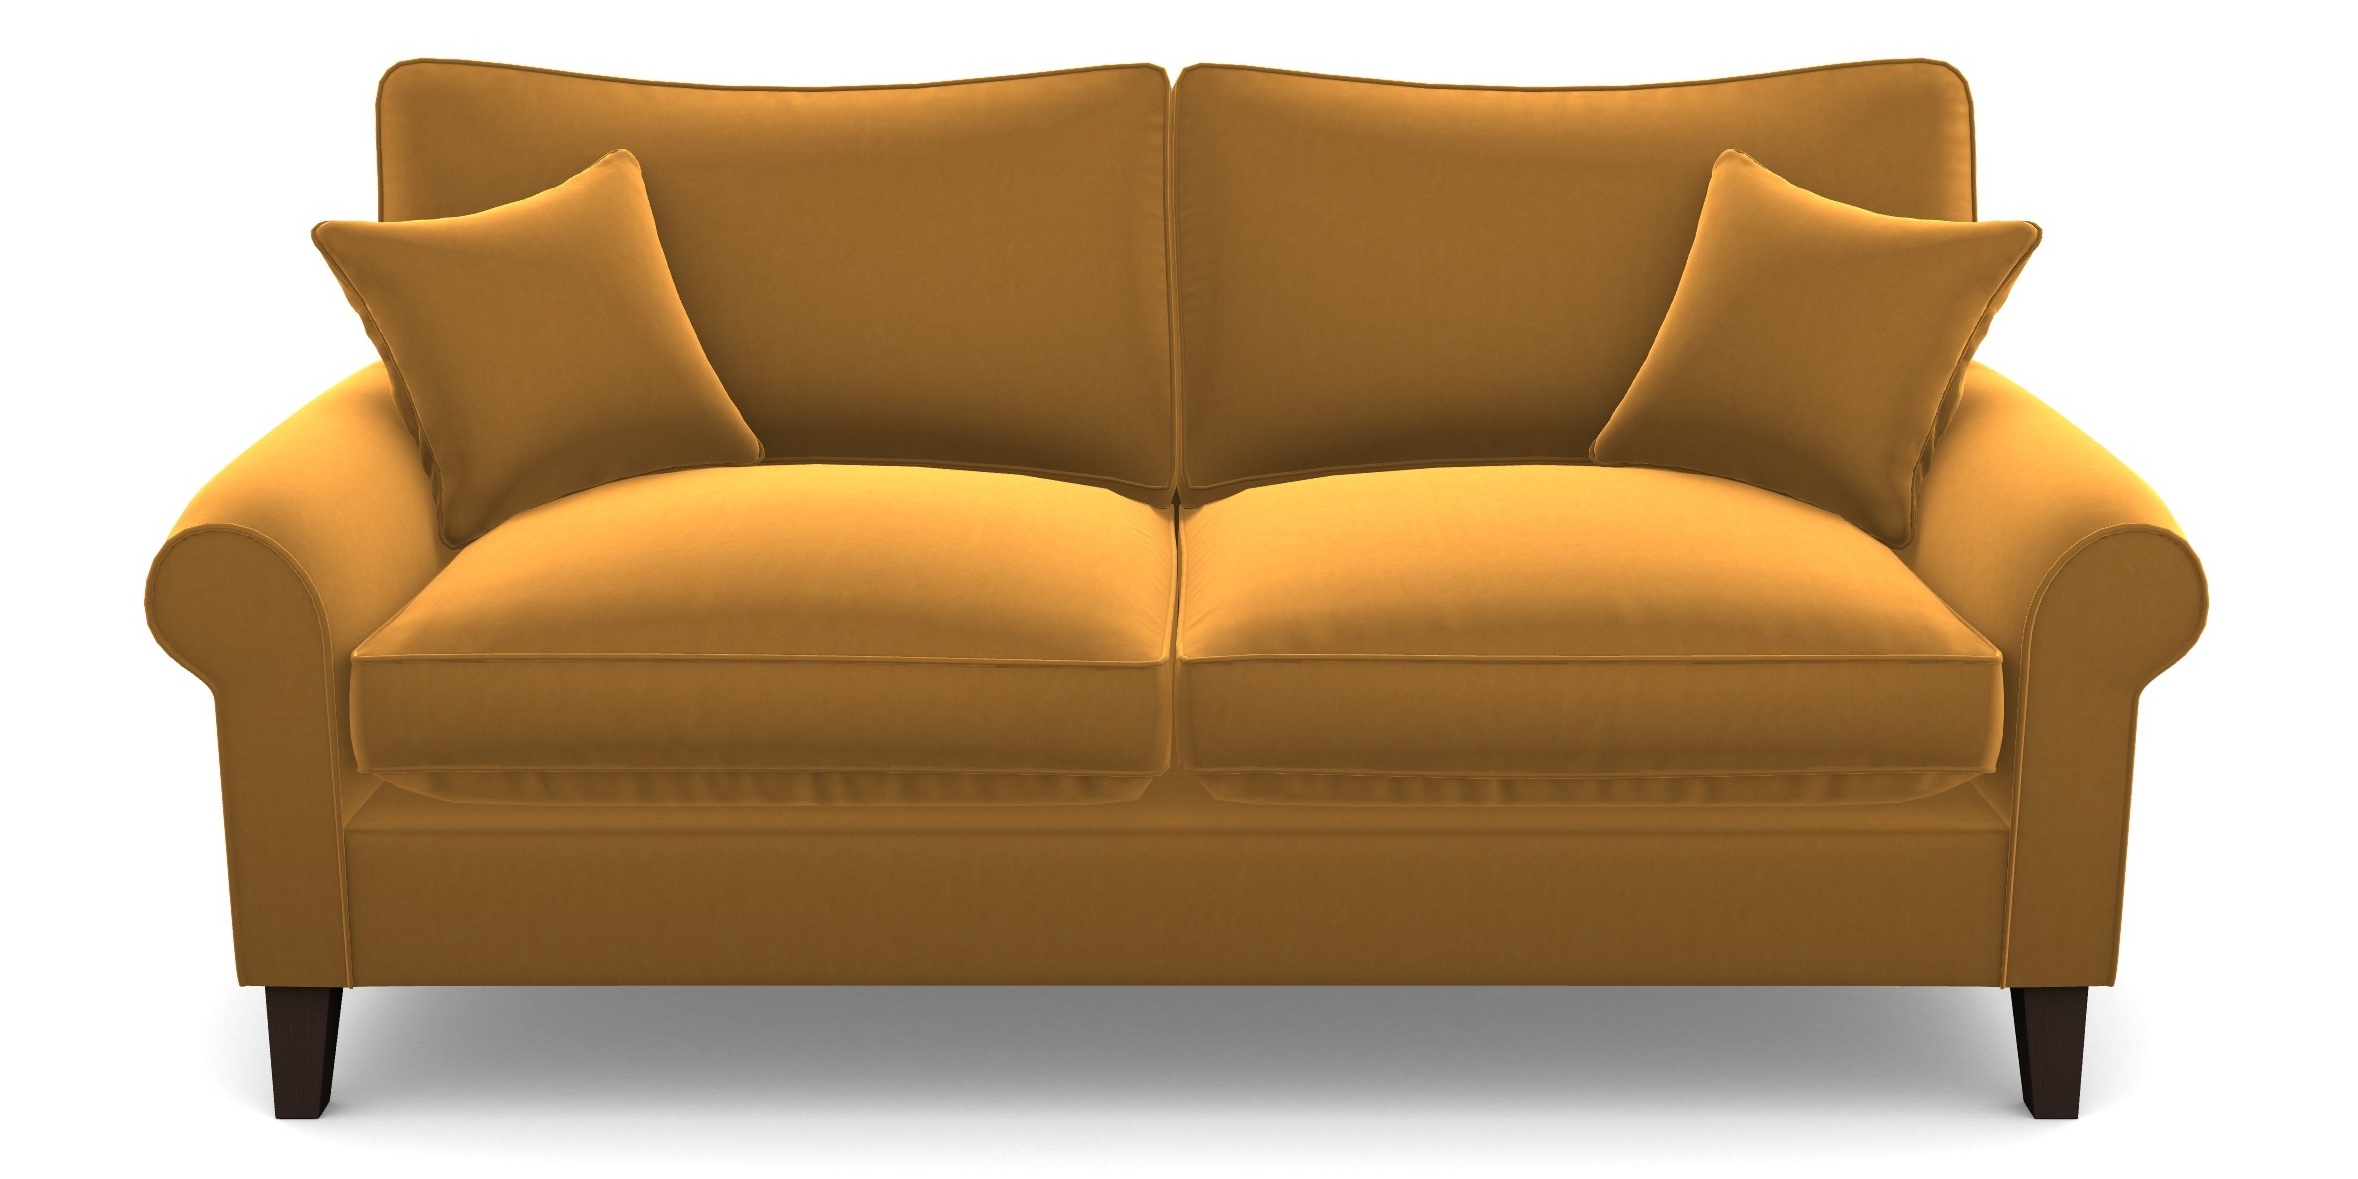 A photo of the Waverley sofa from Sofas and Stuff.